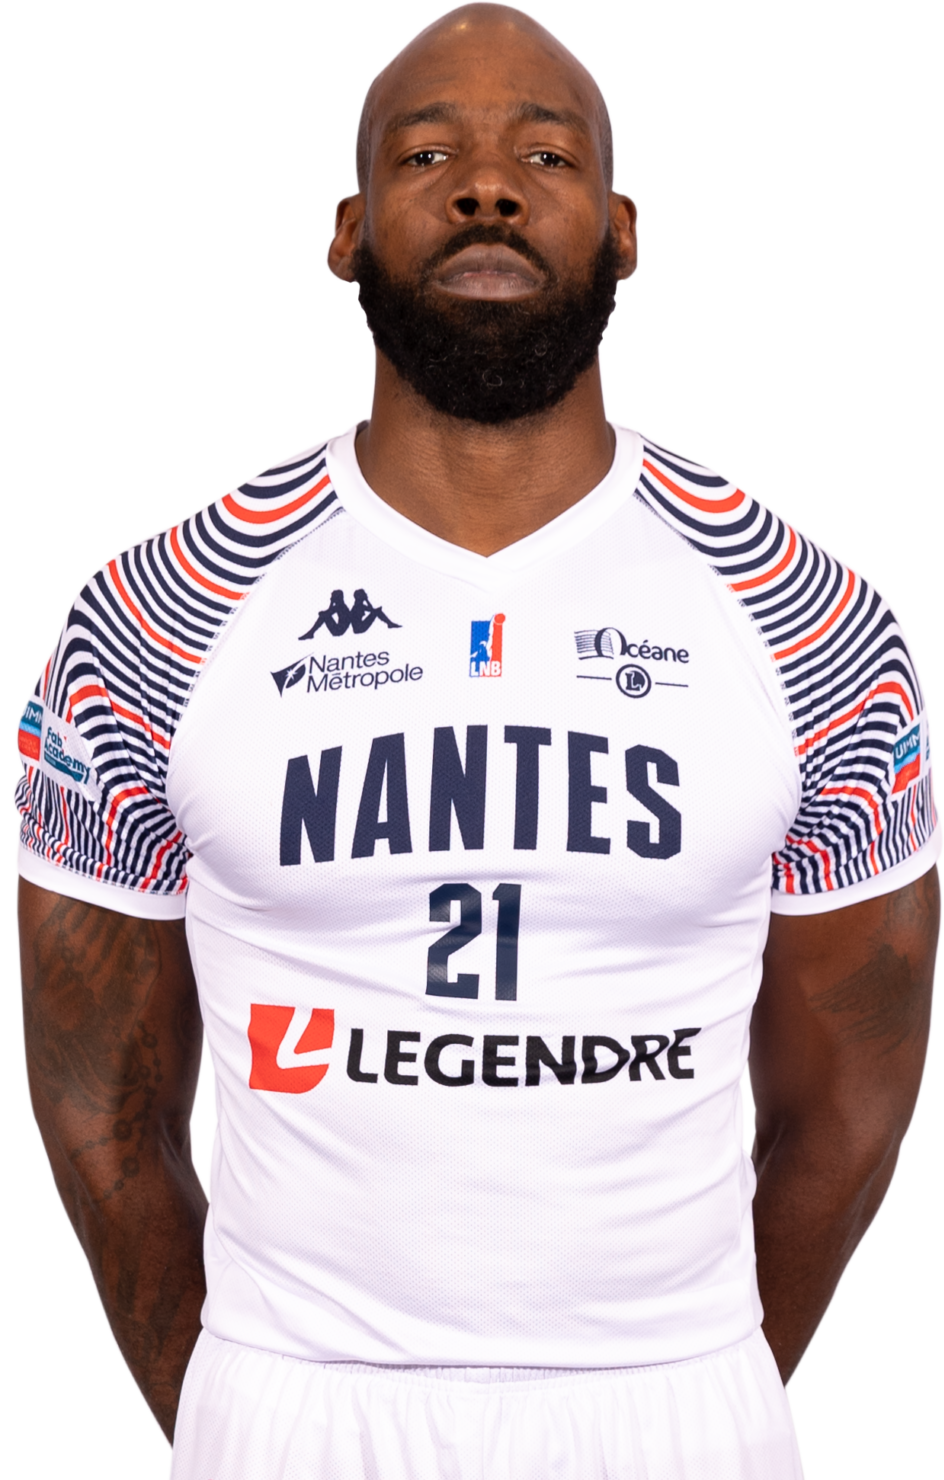 https://www.rouenmetrobasket.com/wp-content/uploads/2022/04/Charles-e1649943131596.png